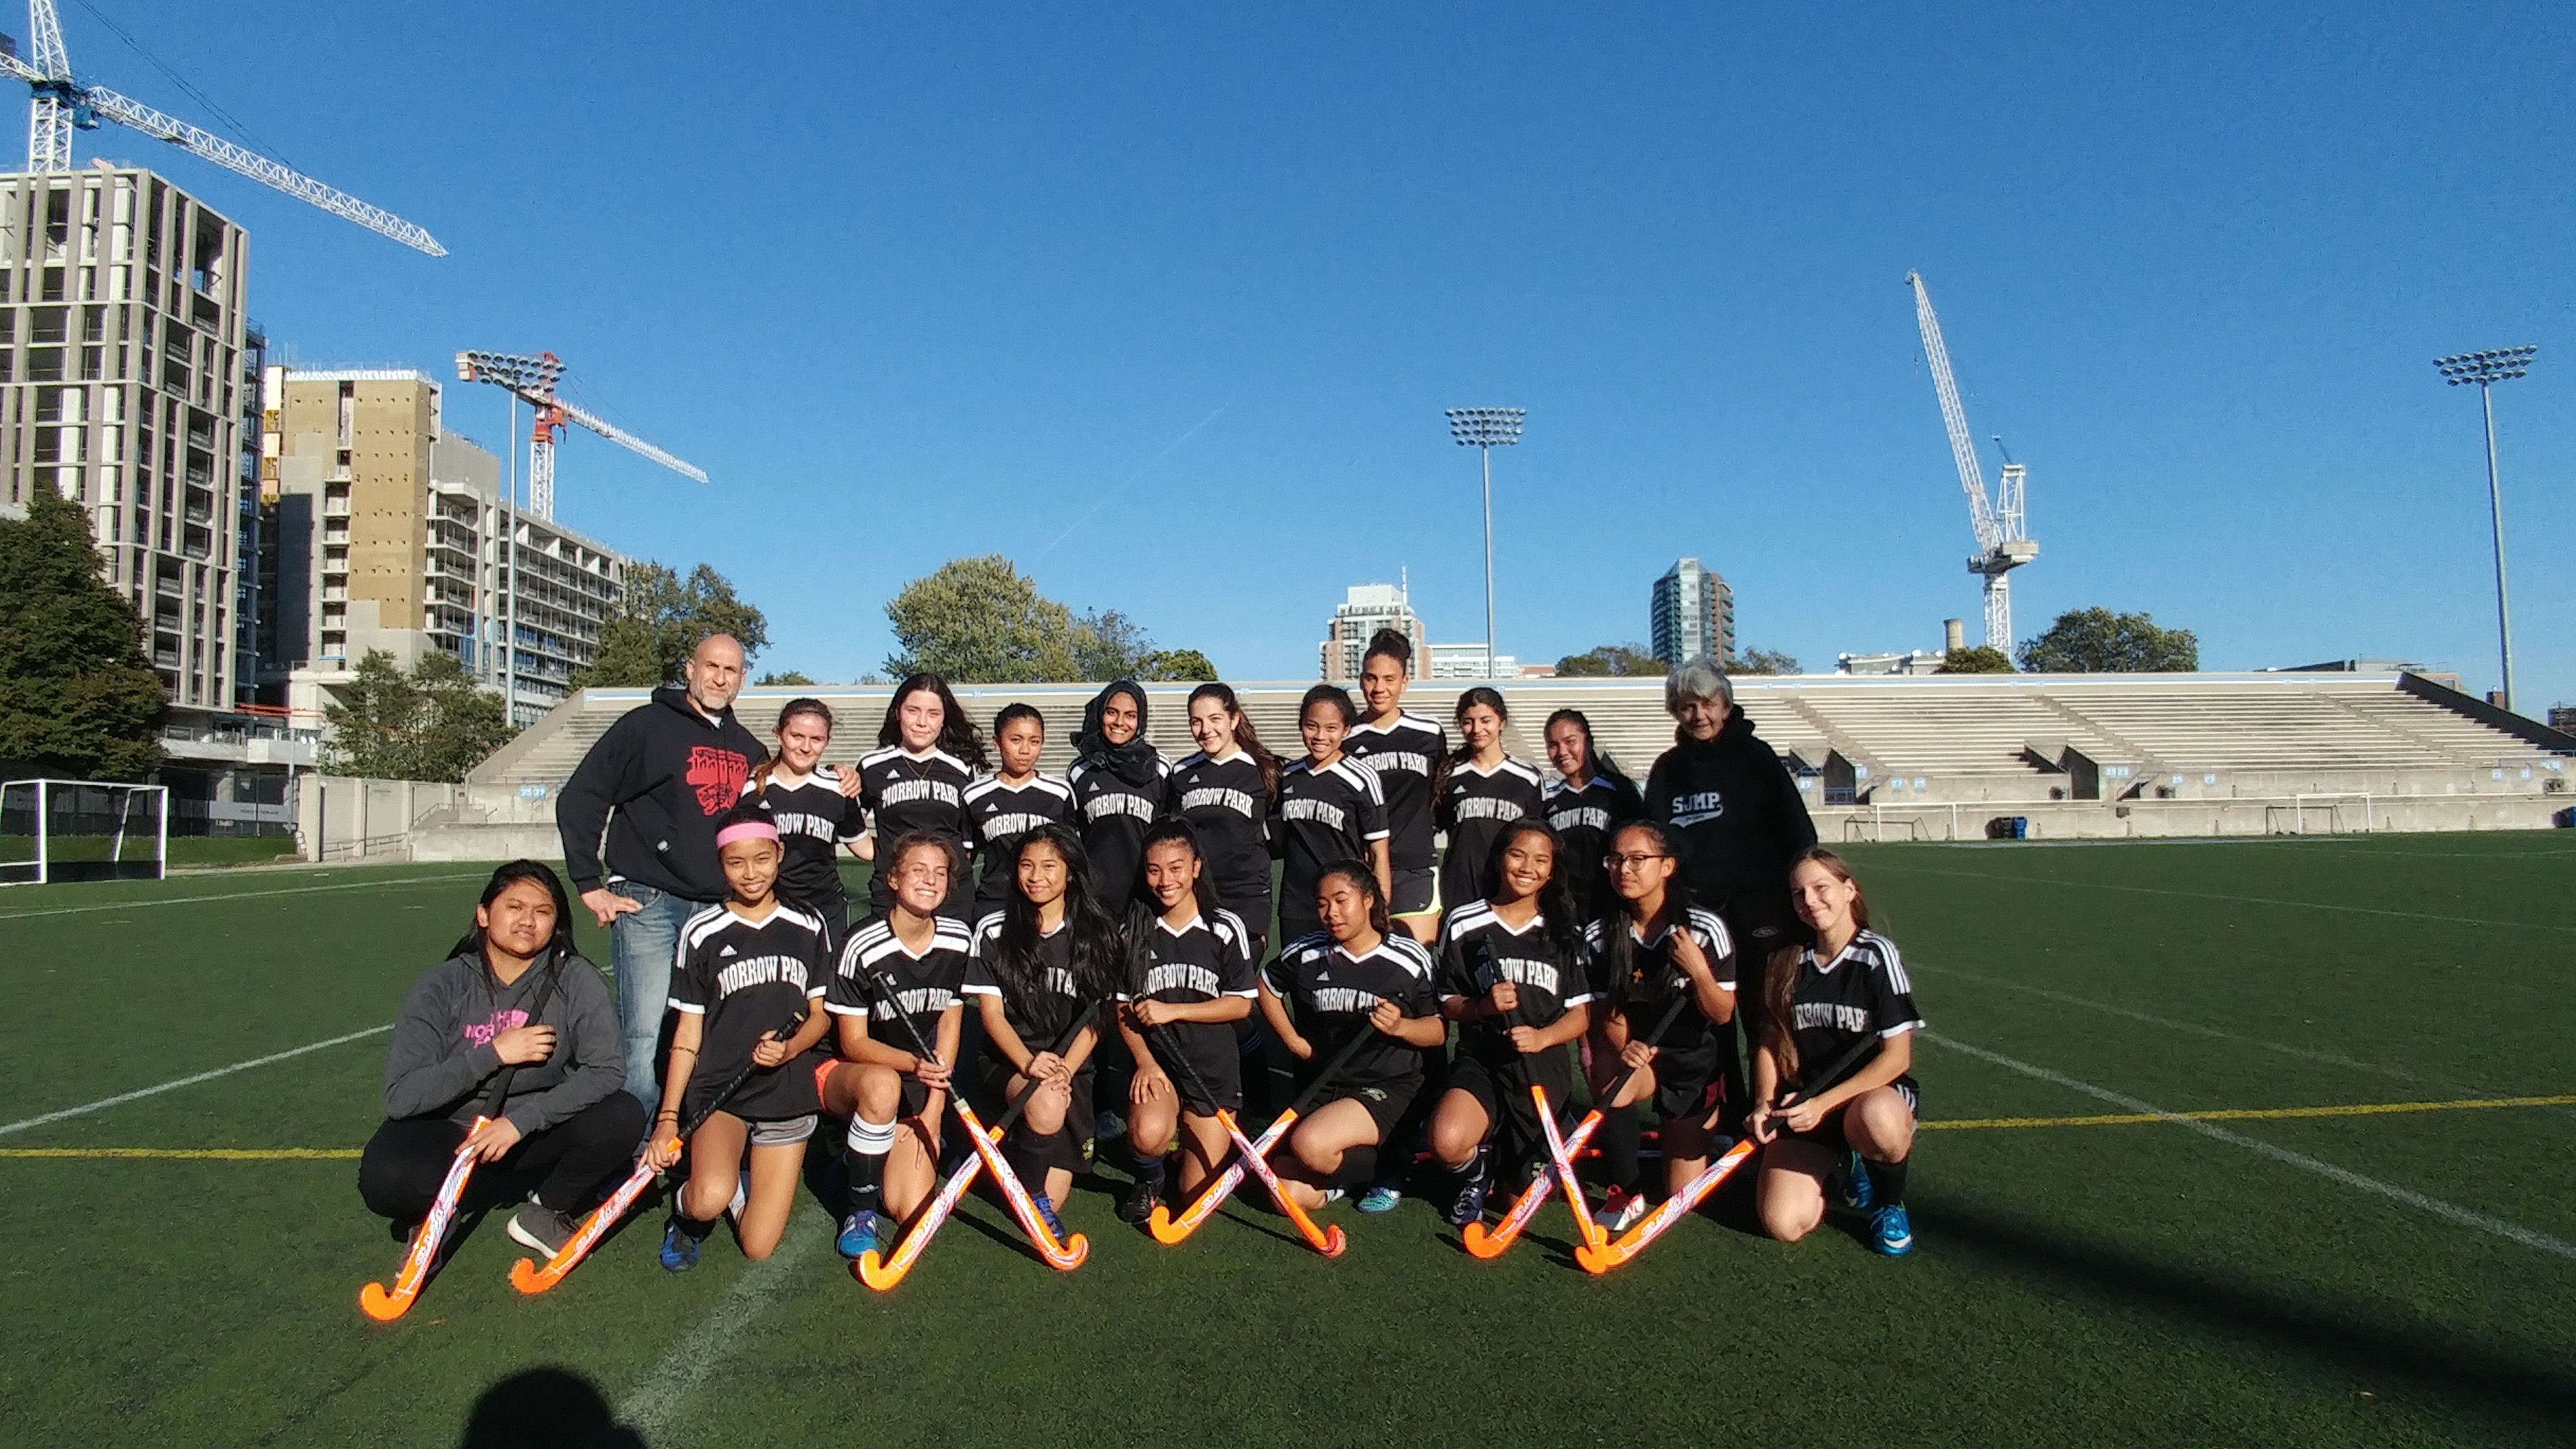 Field hockey team posing together with their uniforms and equipment on the field